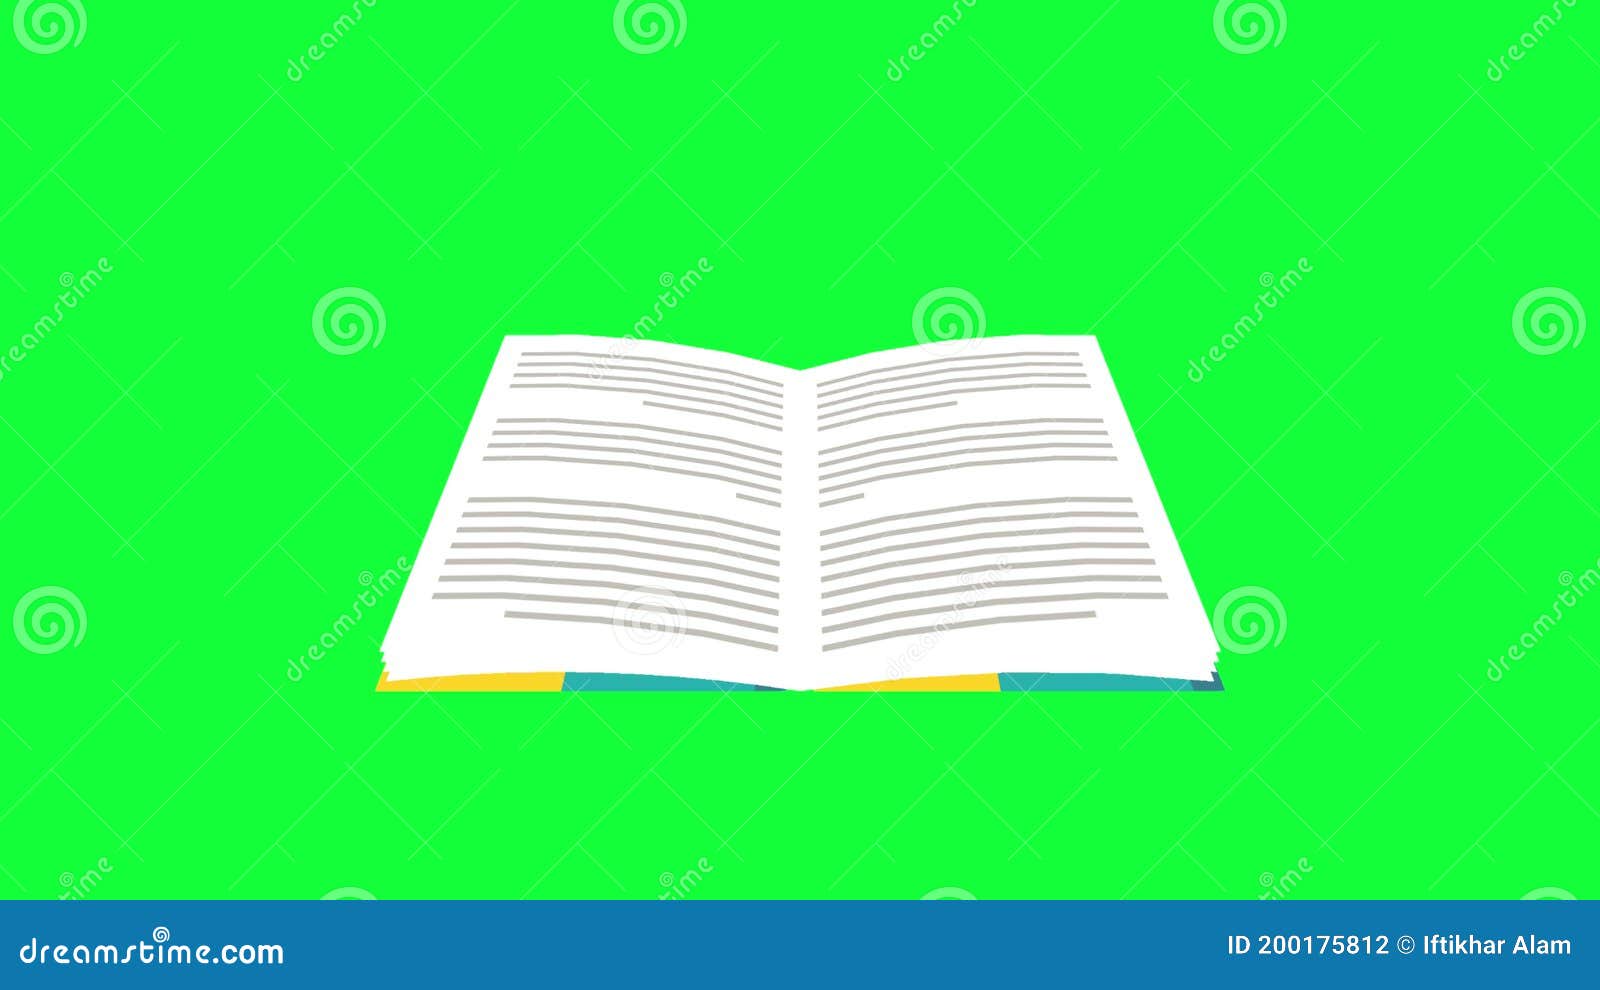 Text Book Open Literature Animation Stock Footage - Video of knowledge,  icon: 192040902